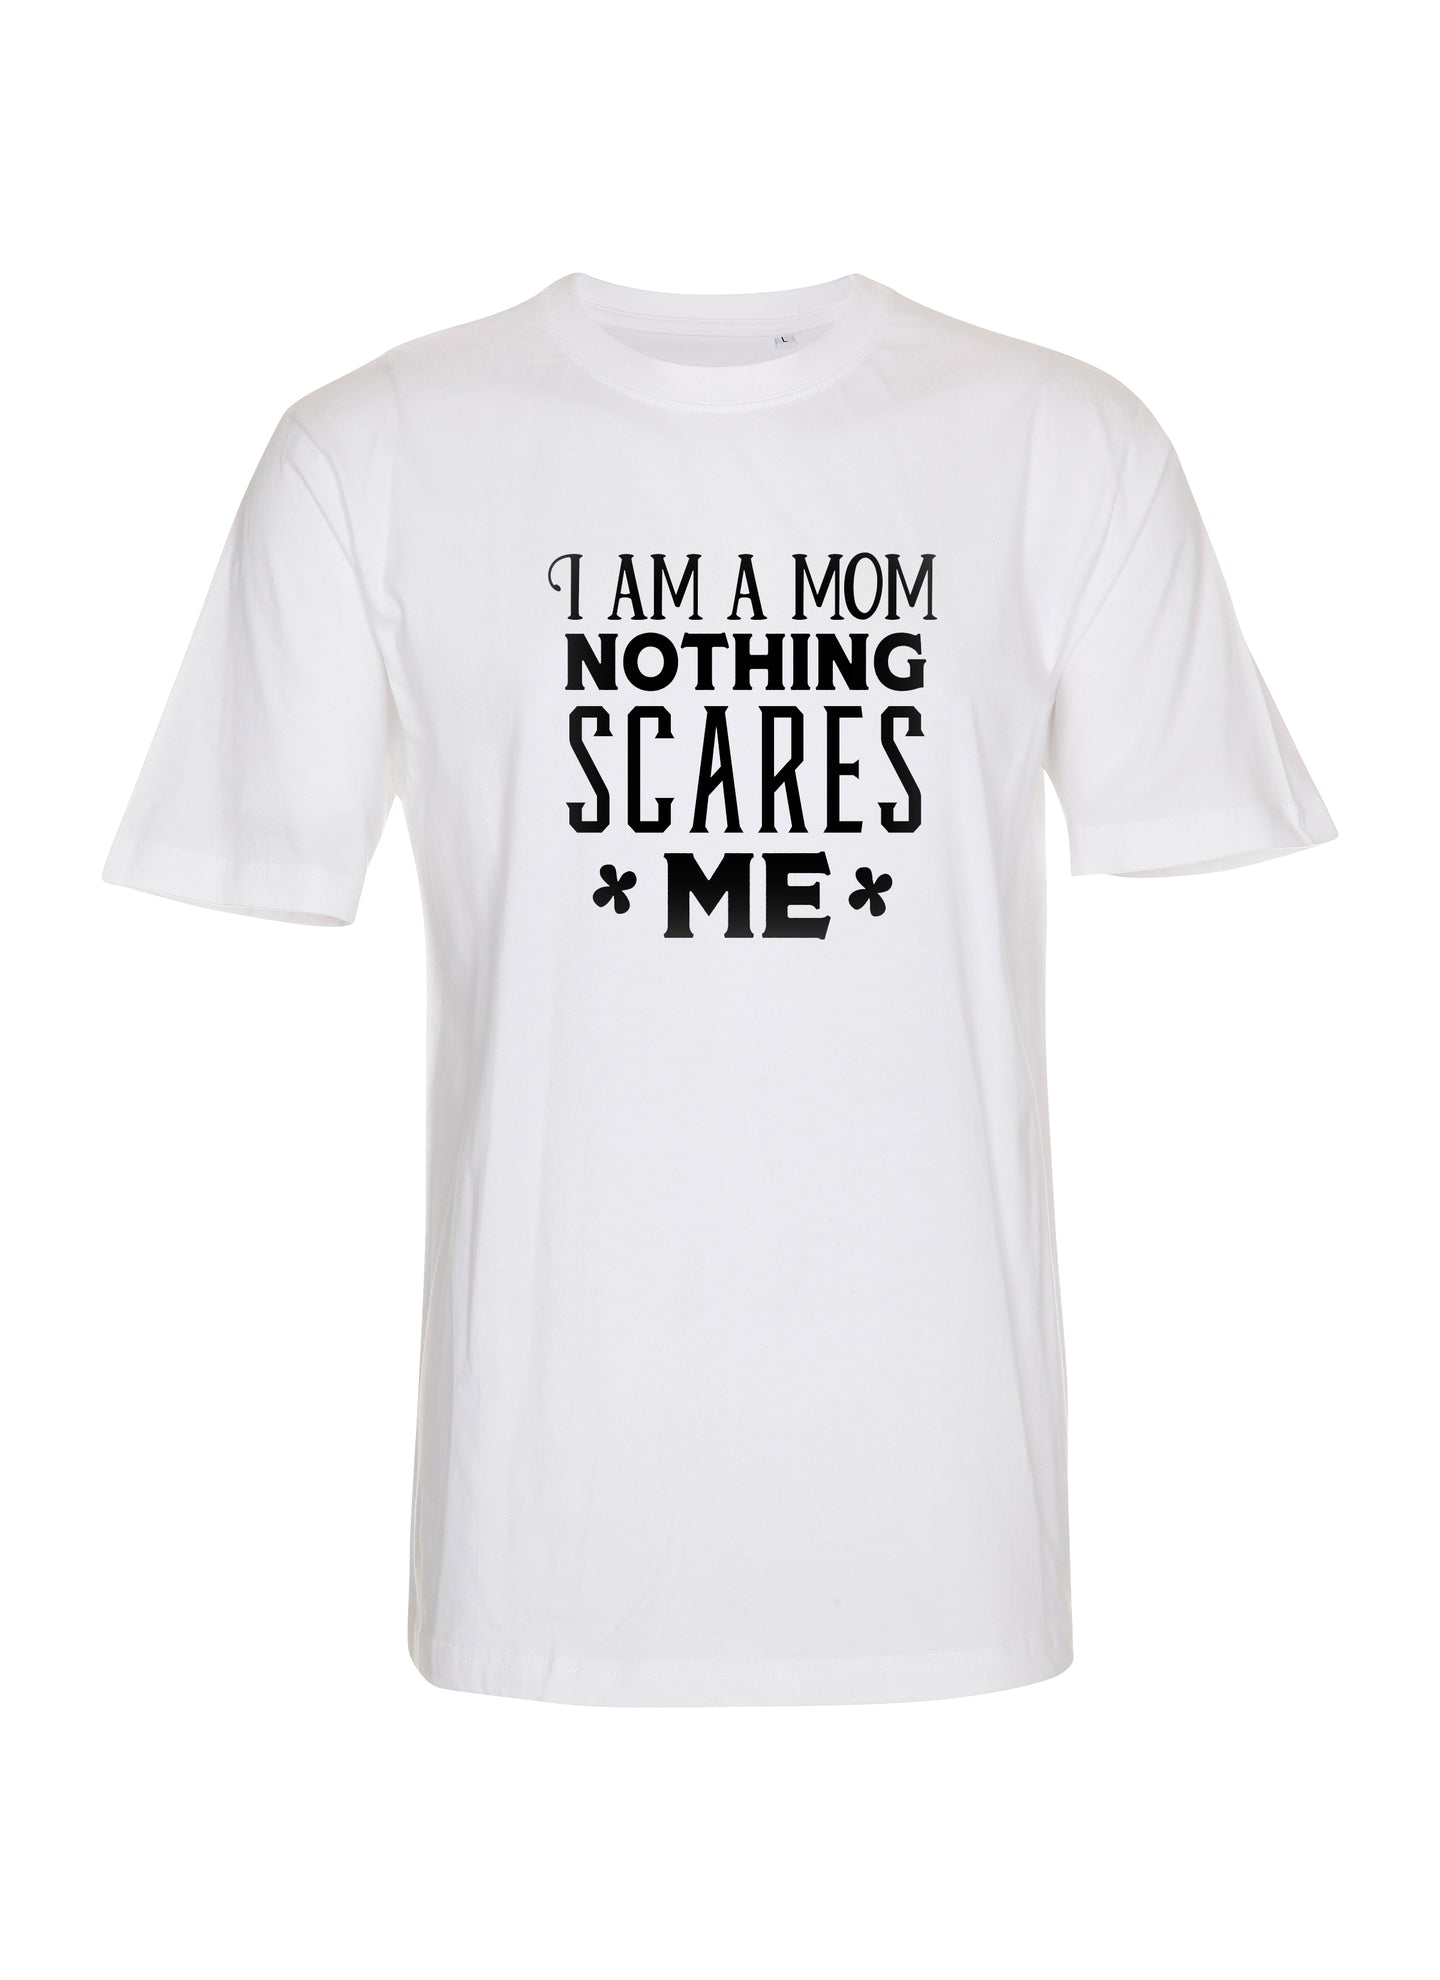 I am a mom nothing scares me